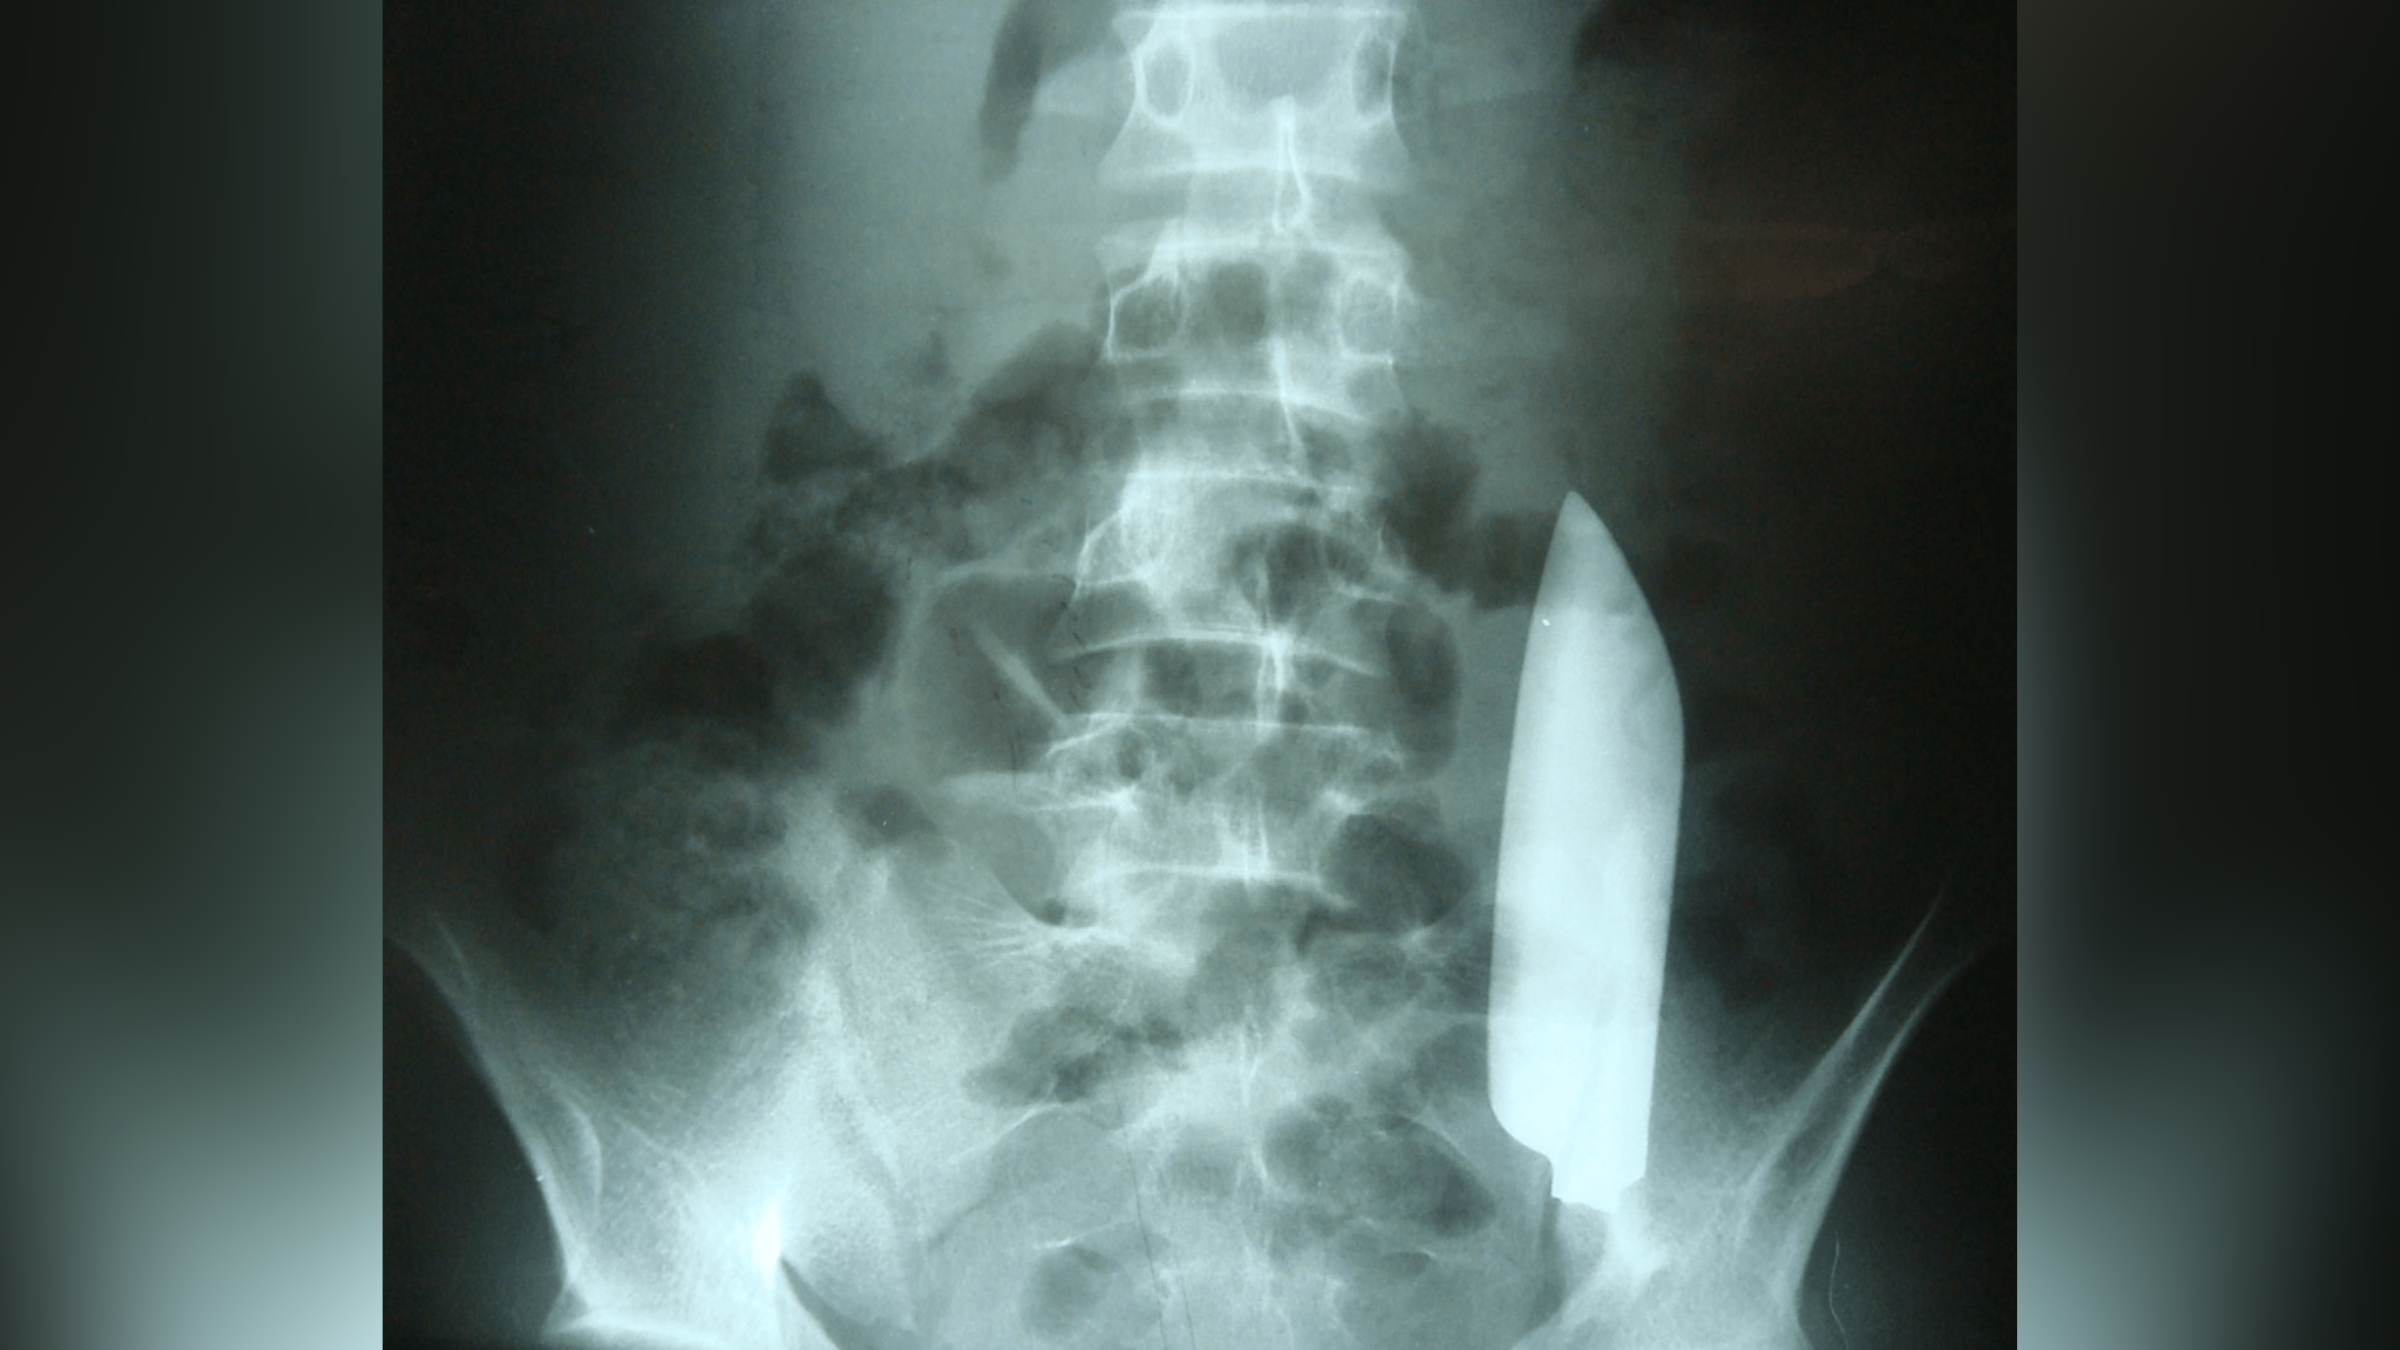 X-ray of the knife blade stuck in the man's abdomen